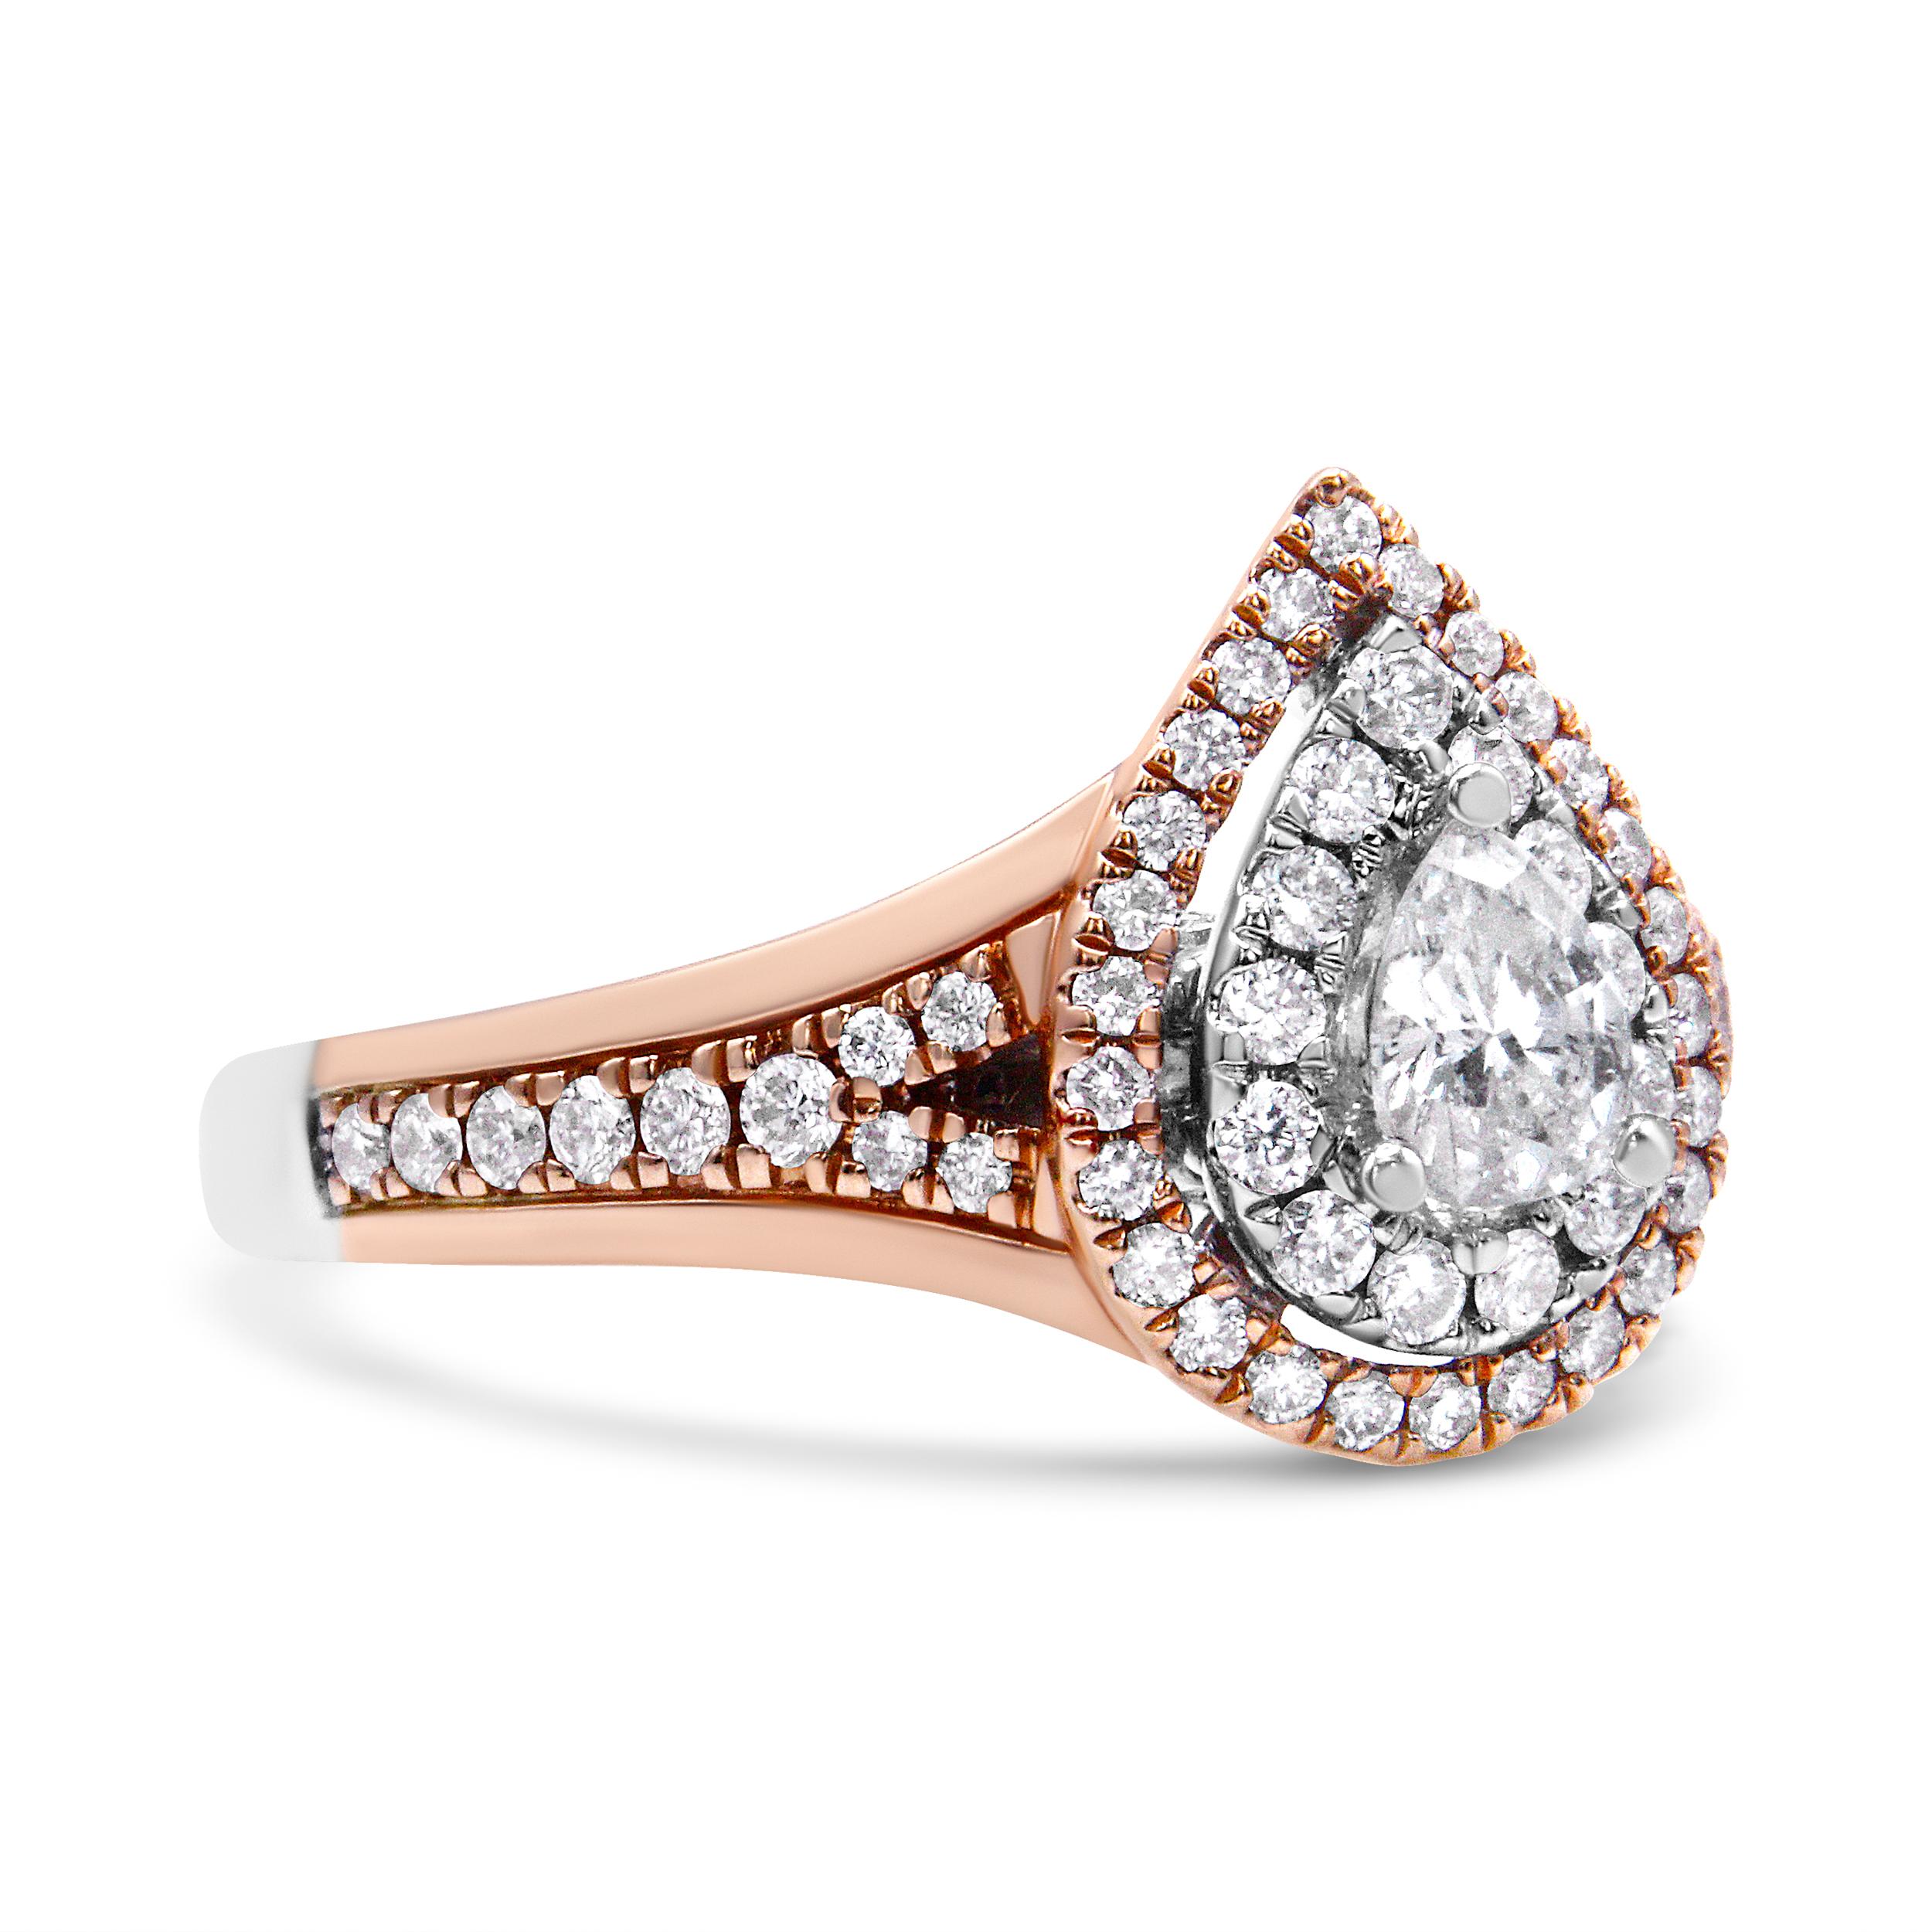 Contemporary 14K White & Rose Gold 1.0 Carat Diamond Pear Shaped Double Halo Engagement Ring